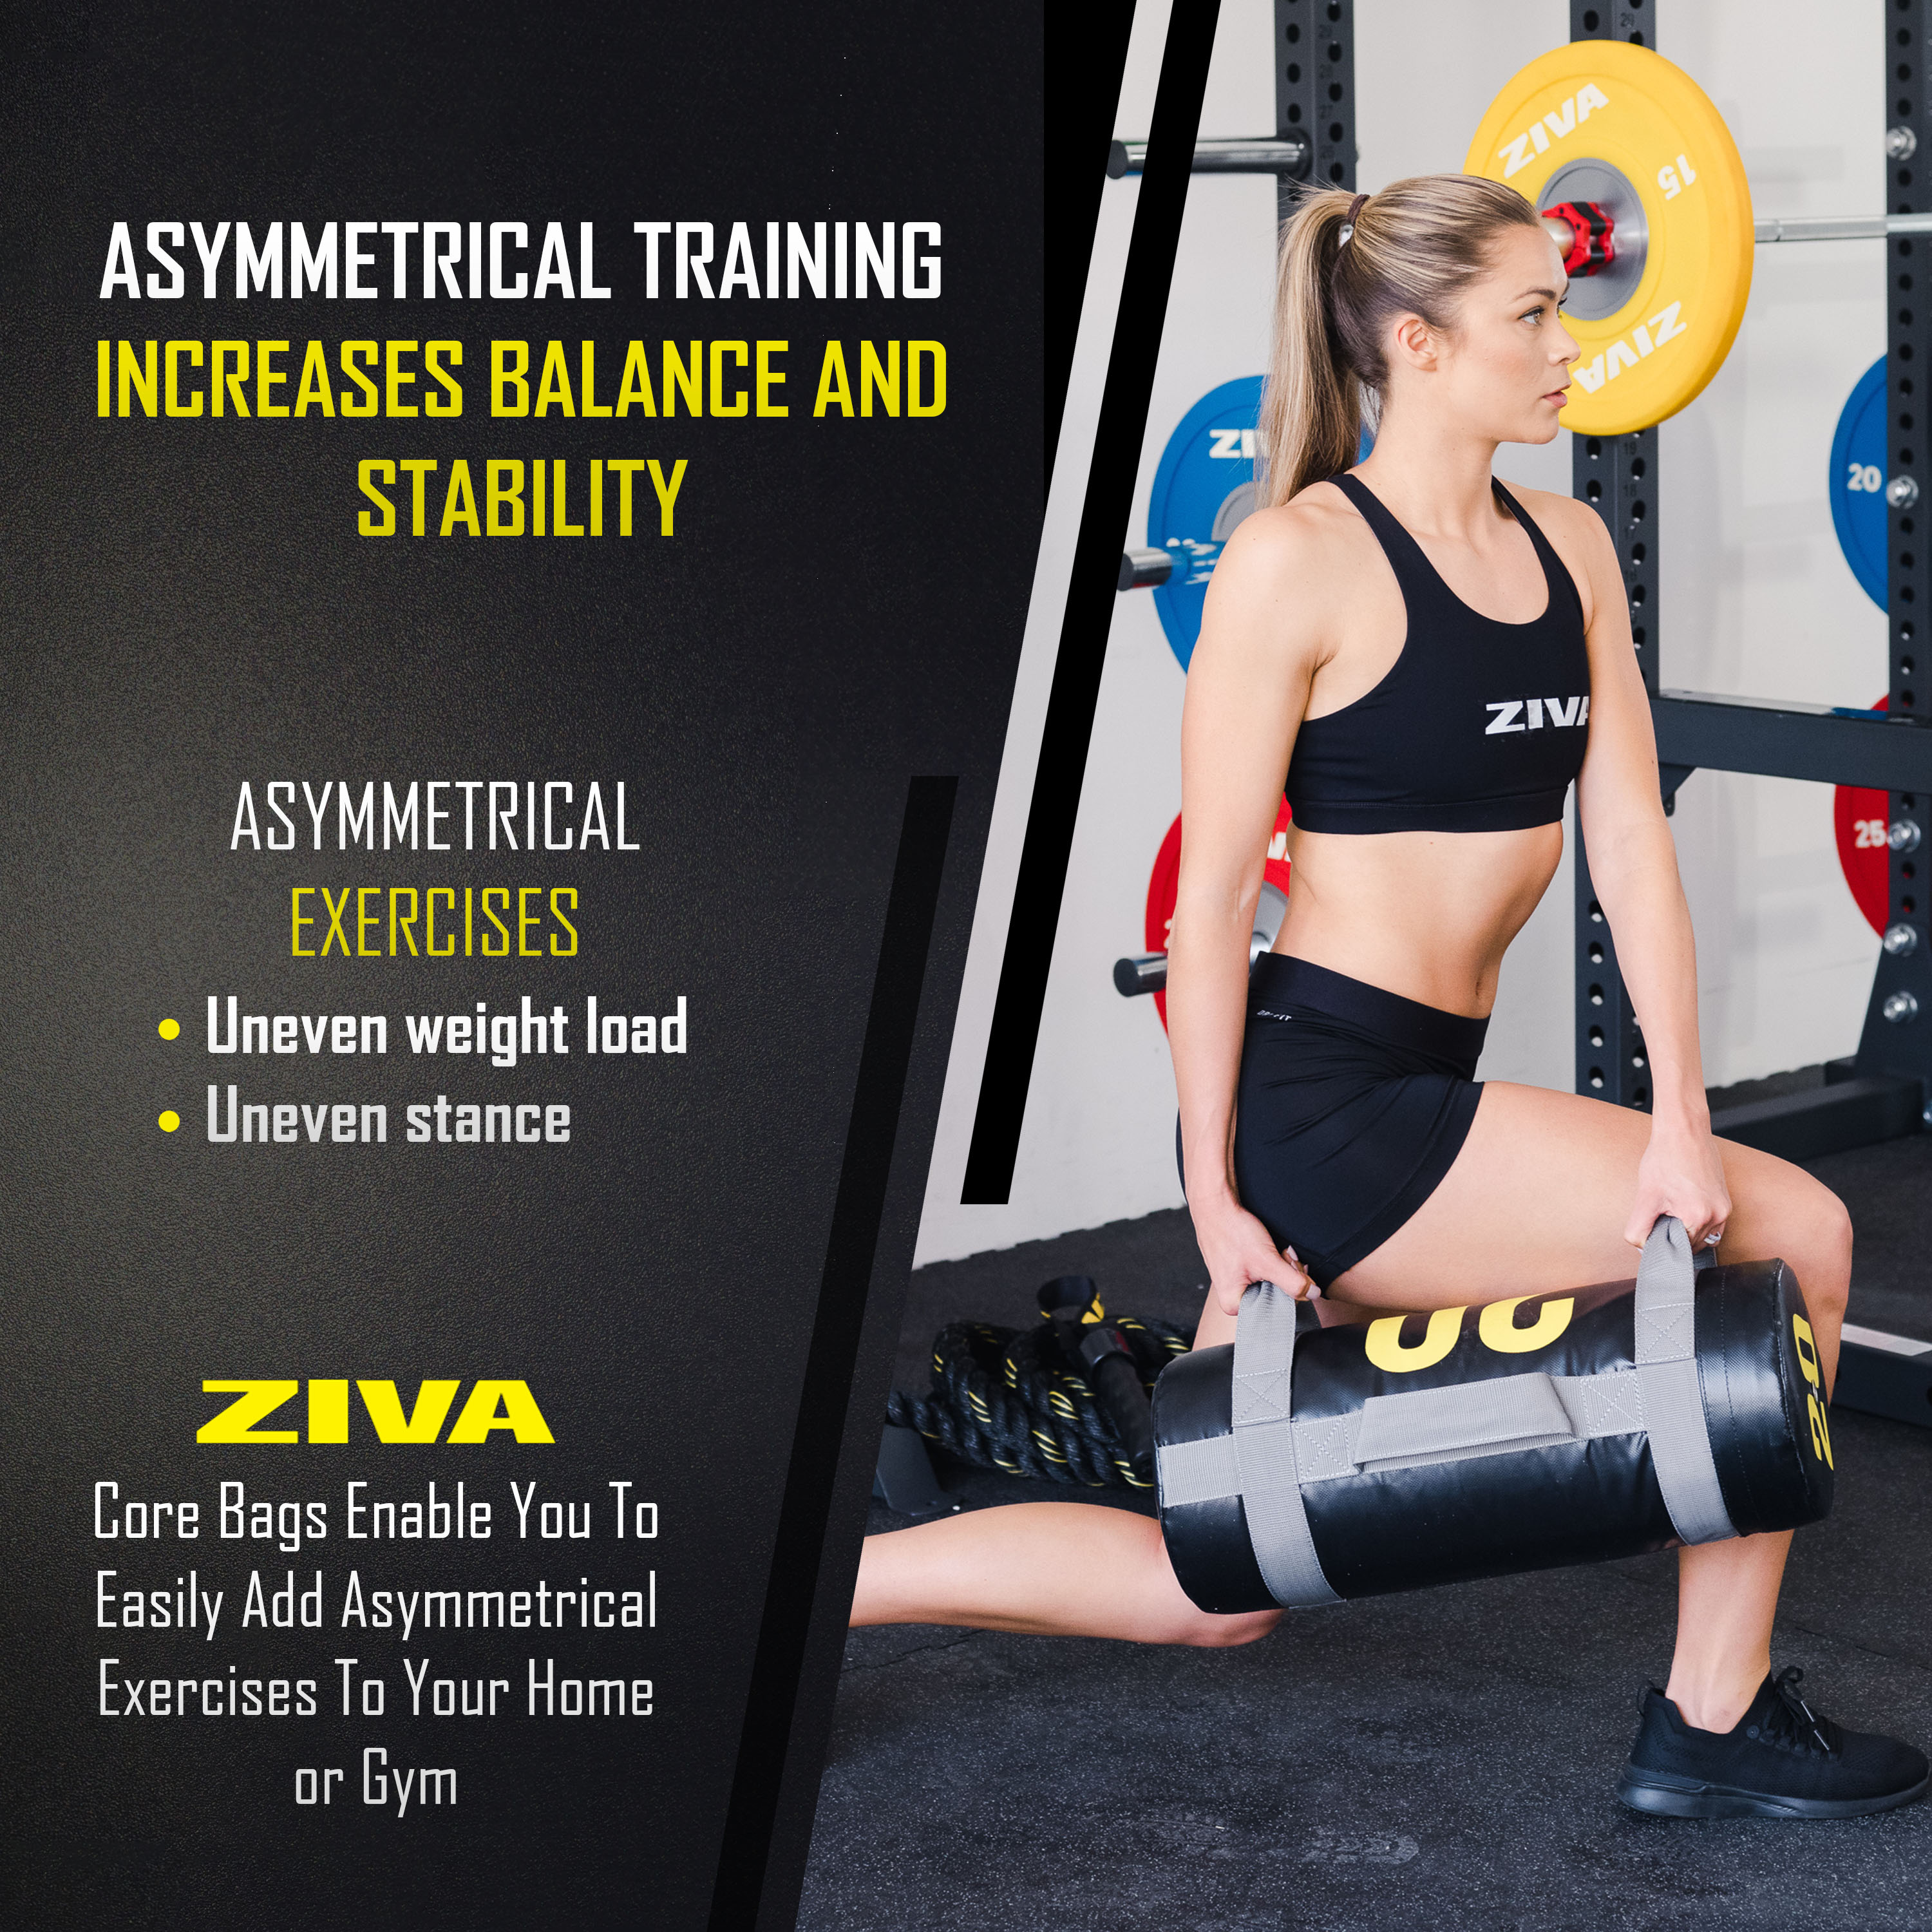 Asymmetrical training increases balance and stability. Asymmetrical exercises: uneven weight load and uneven stance. Ziva core bags enable you to easily add asymmetrical exercises to your home or gym.